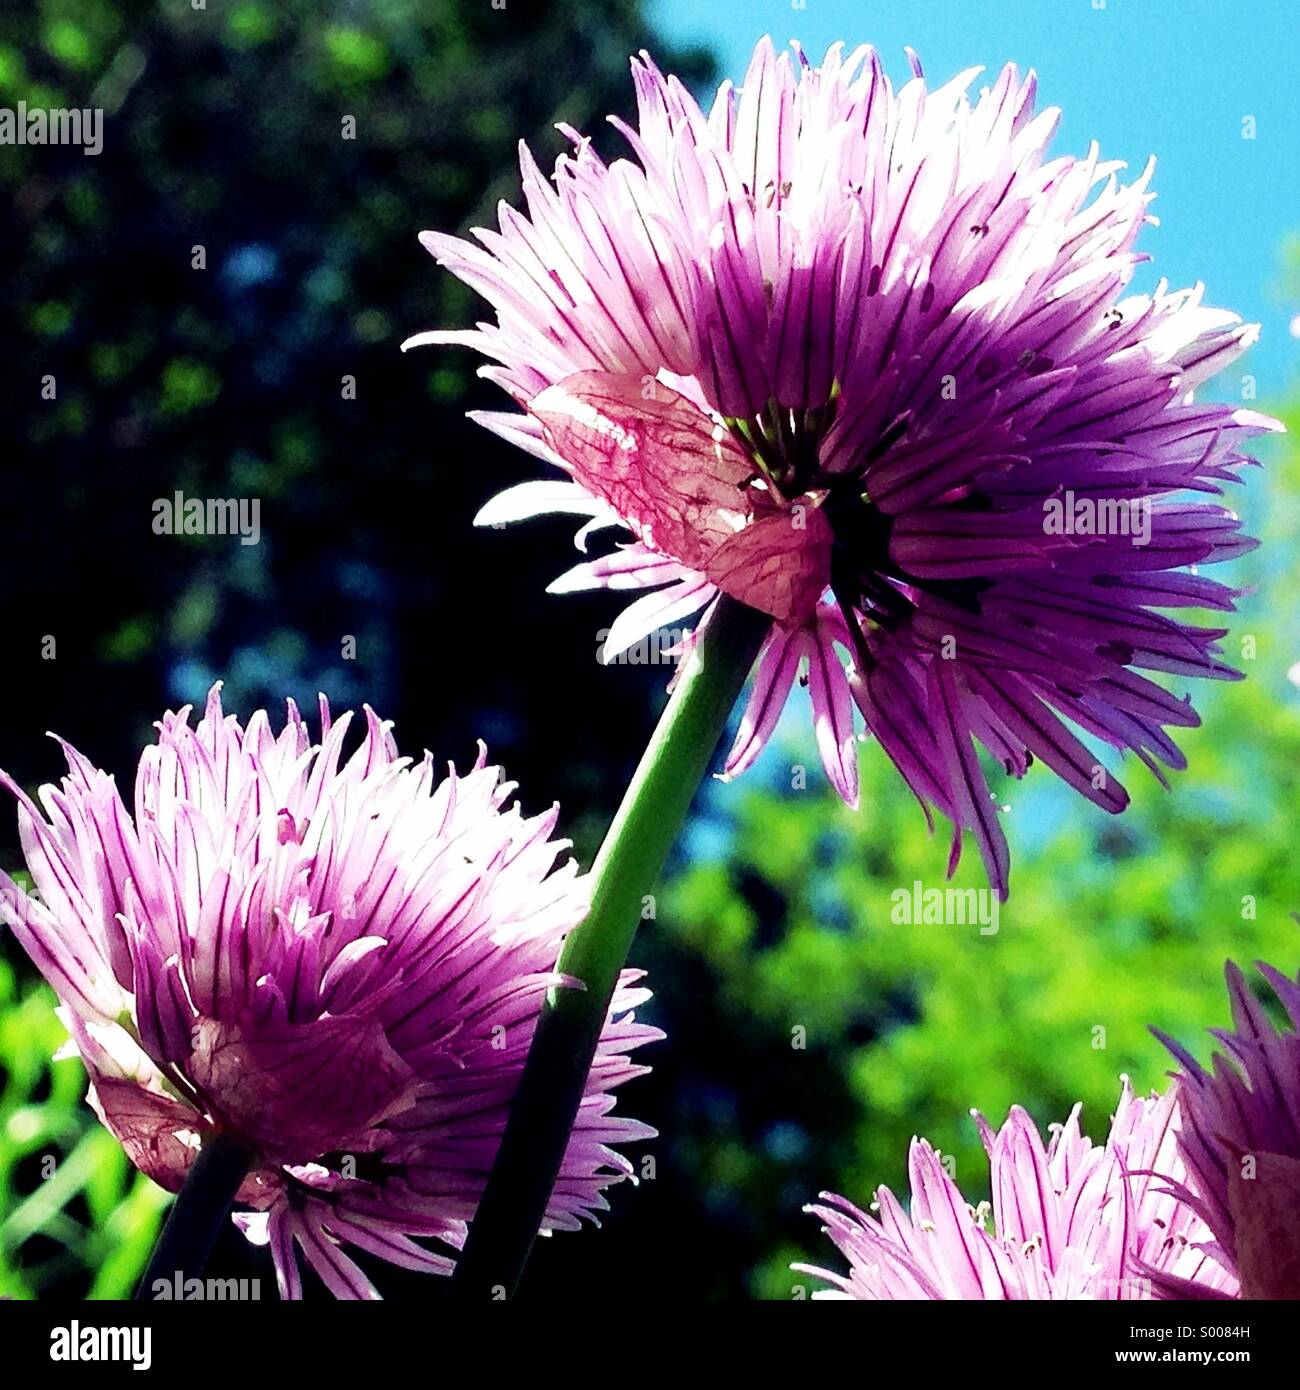 Flowering chives Stock Photo